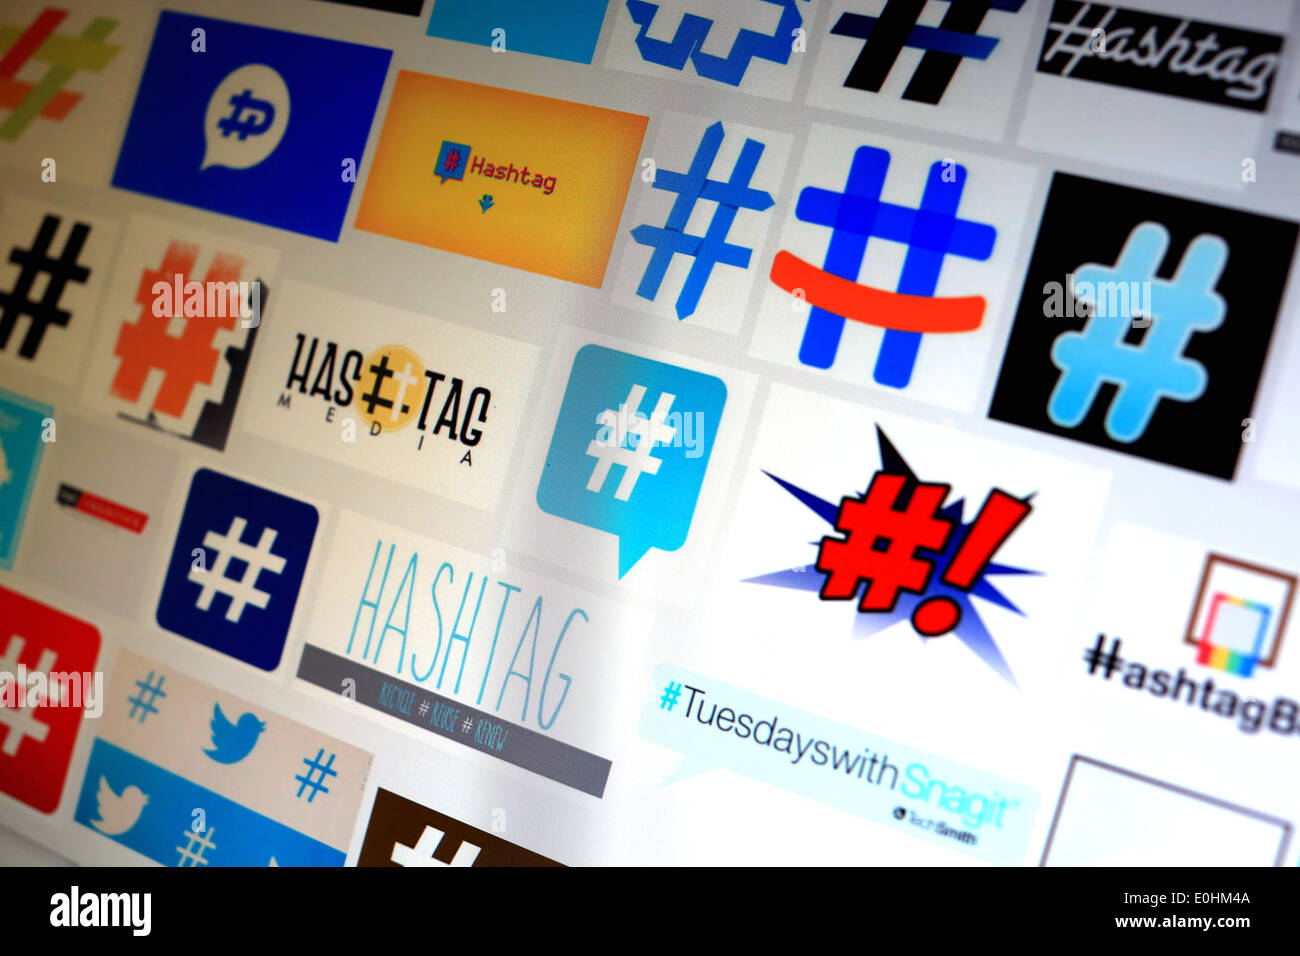 A computer screen on hashtag signs used in social media like Twitter and Facebook on the internet Stock Photo